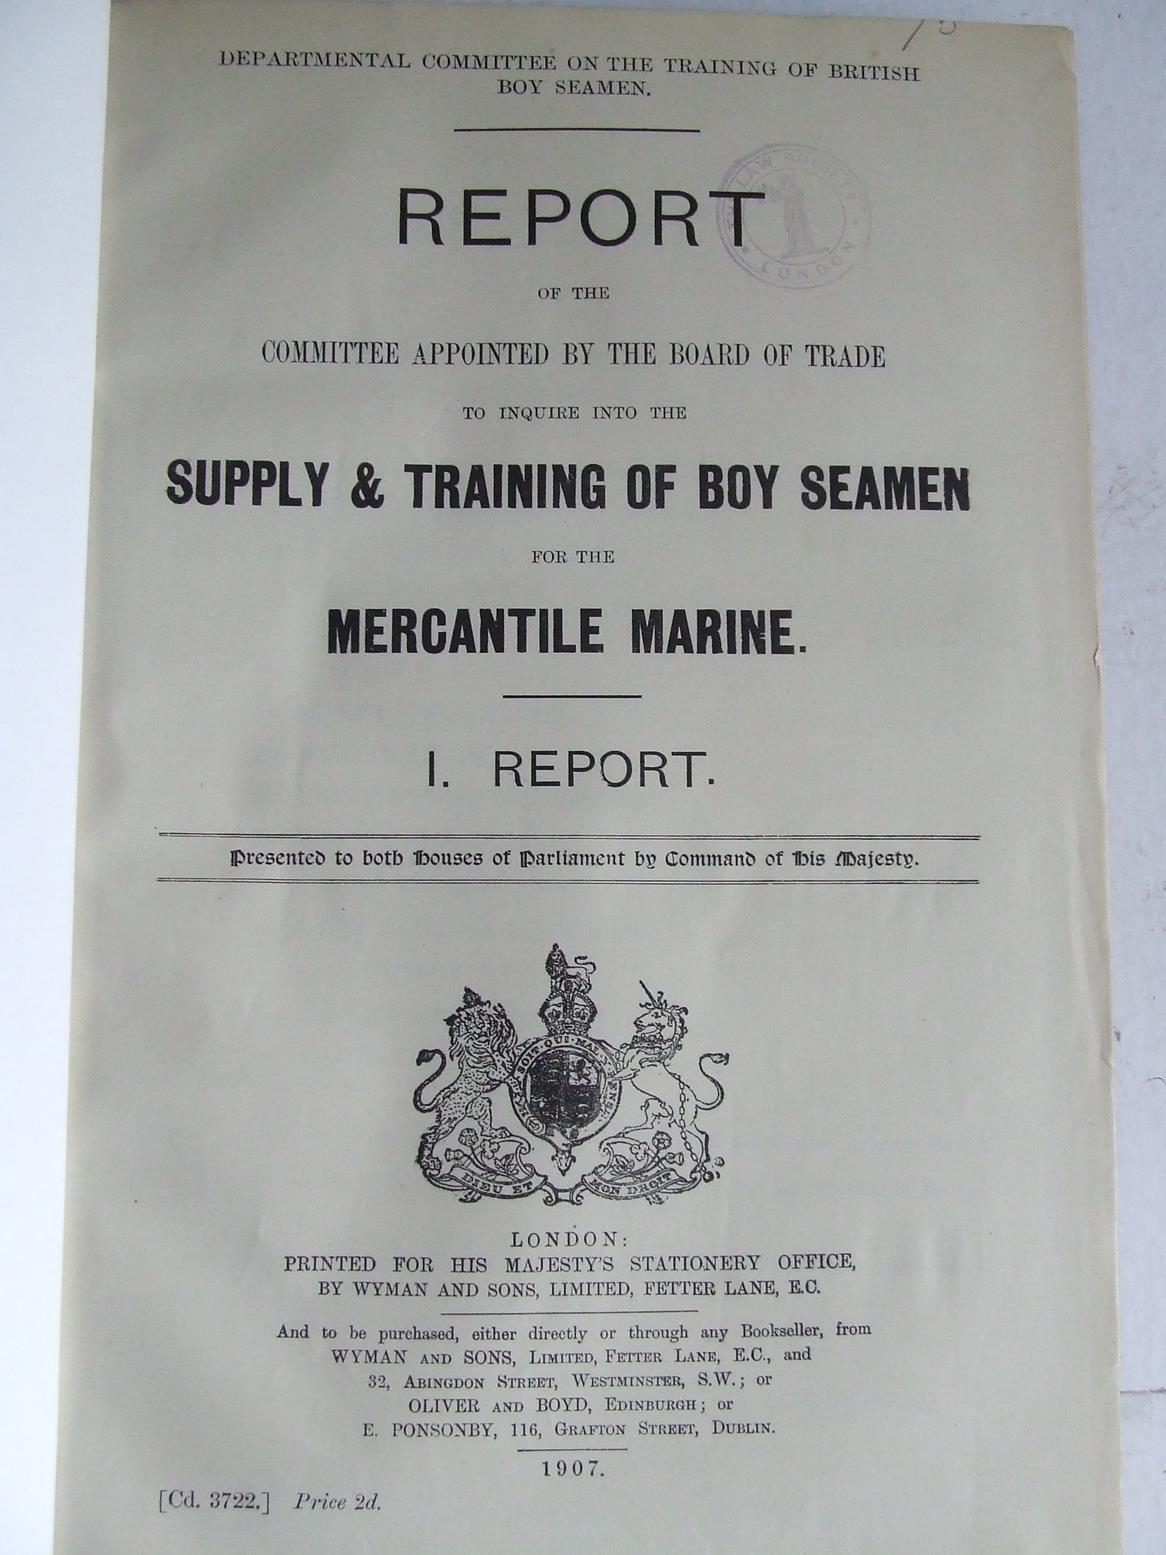 REPORT OF THE COMMITTEE APPOINTED BY THE BOARD OF TRADETO INQUIRE INTO THE SUPPLY & TRAINING OF BOY SEAMEN FOR THE MERCANTILE MARINE